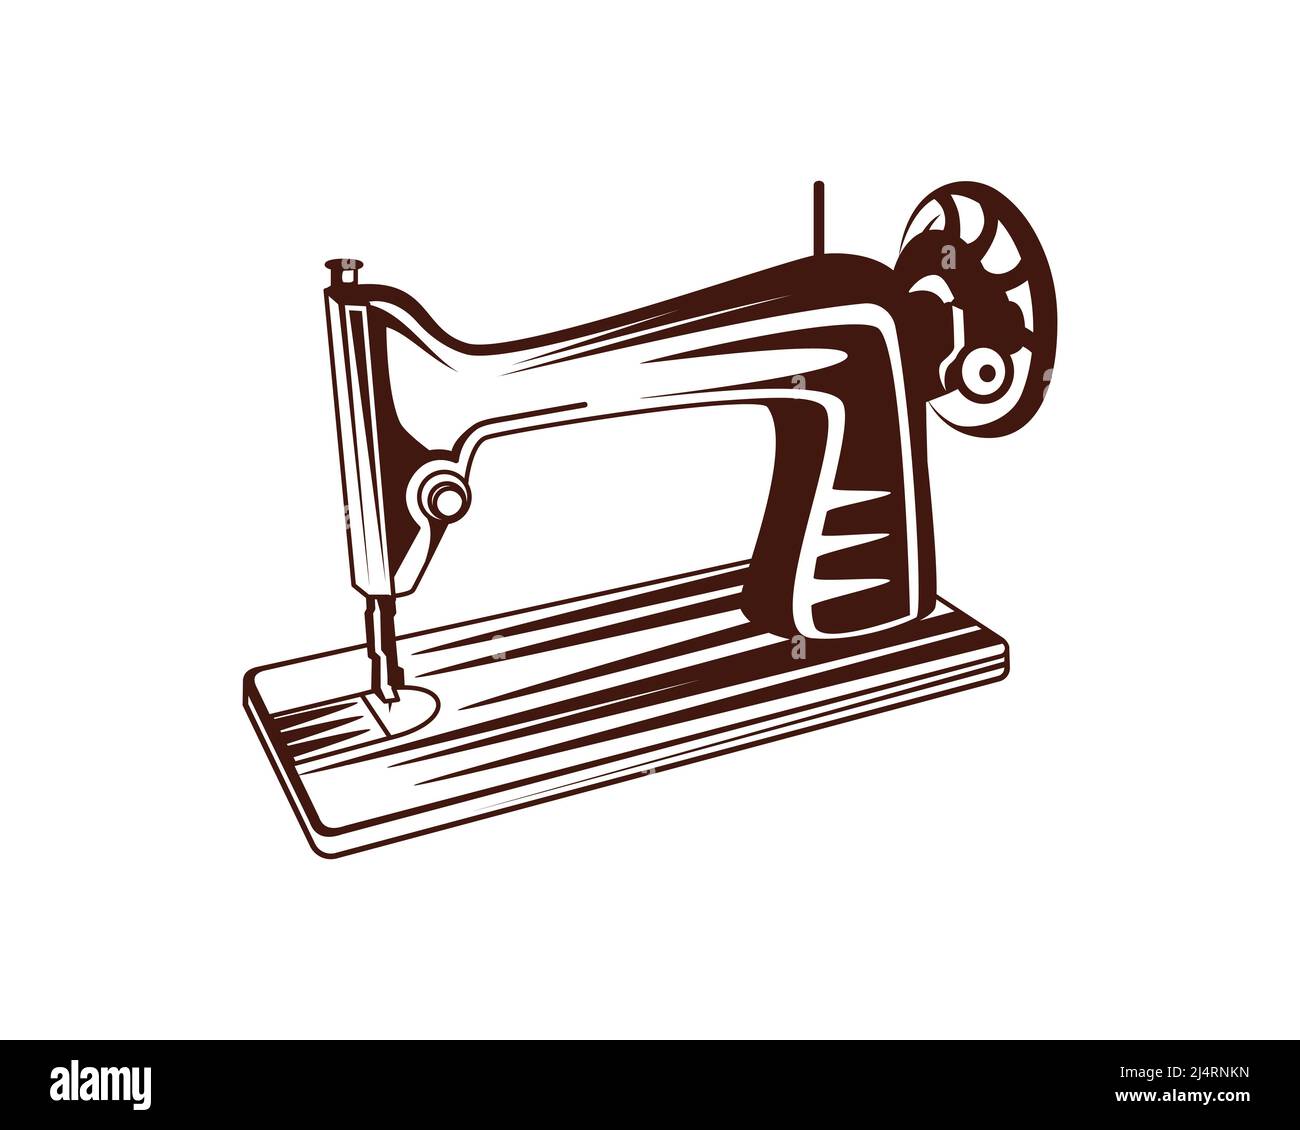 Vintage Sewing Machine Illustration with Silhouette Style Vector Stock Vector